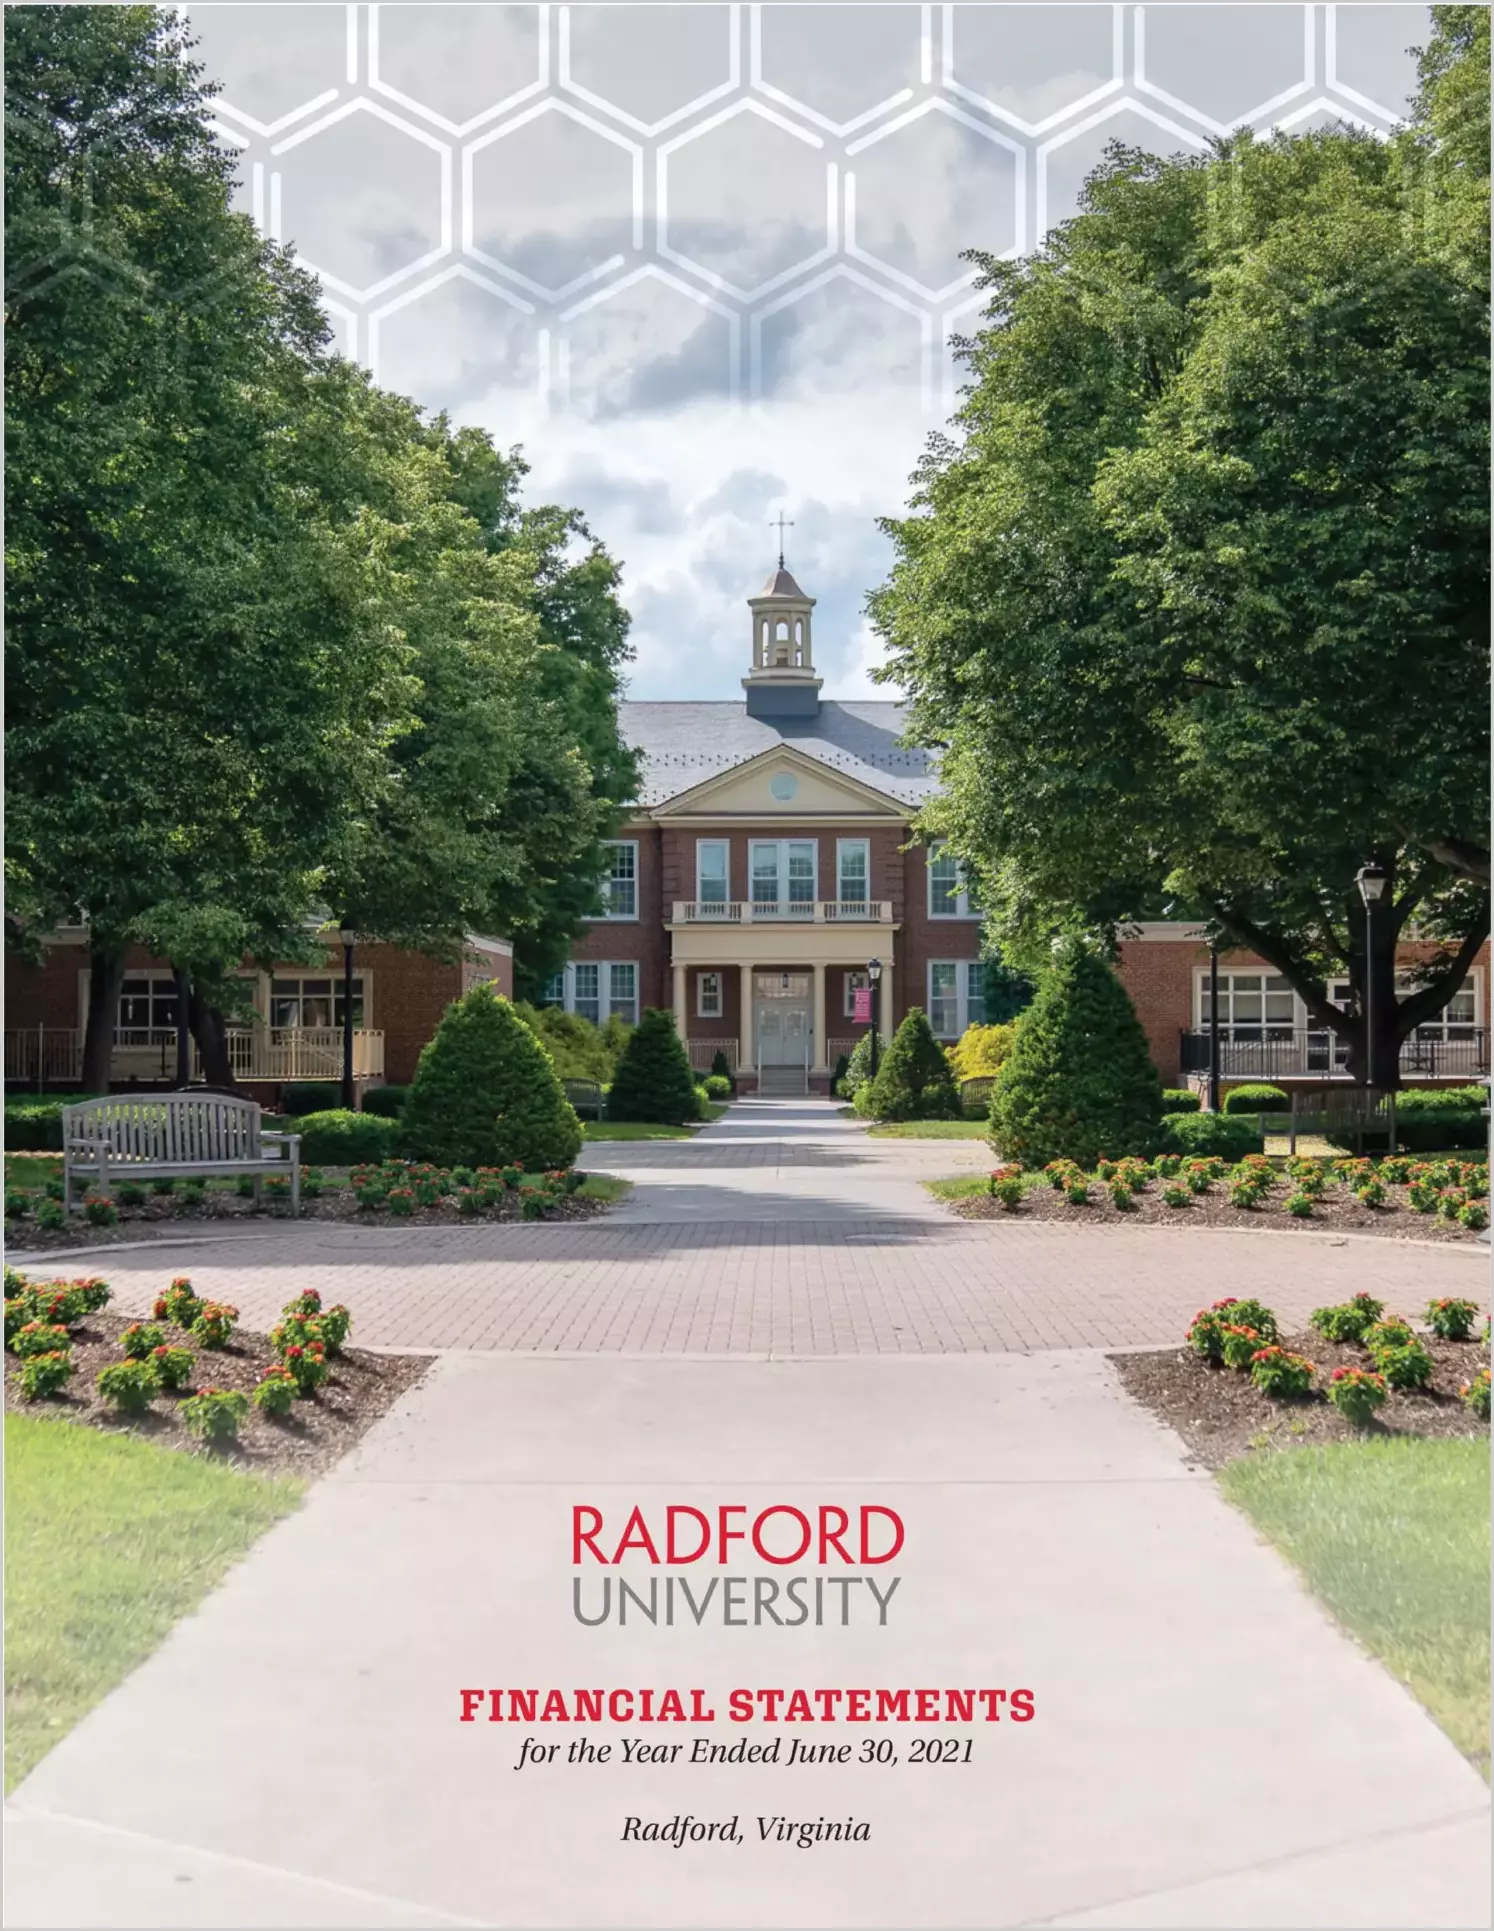 Radford University Financial Statements for the year ended June 30, 2021